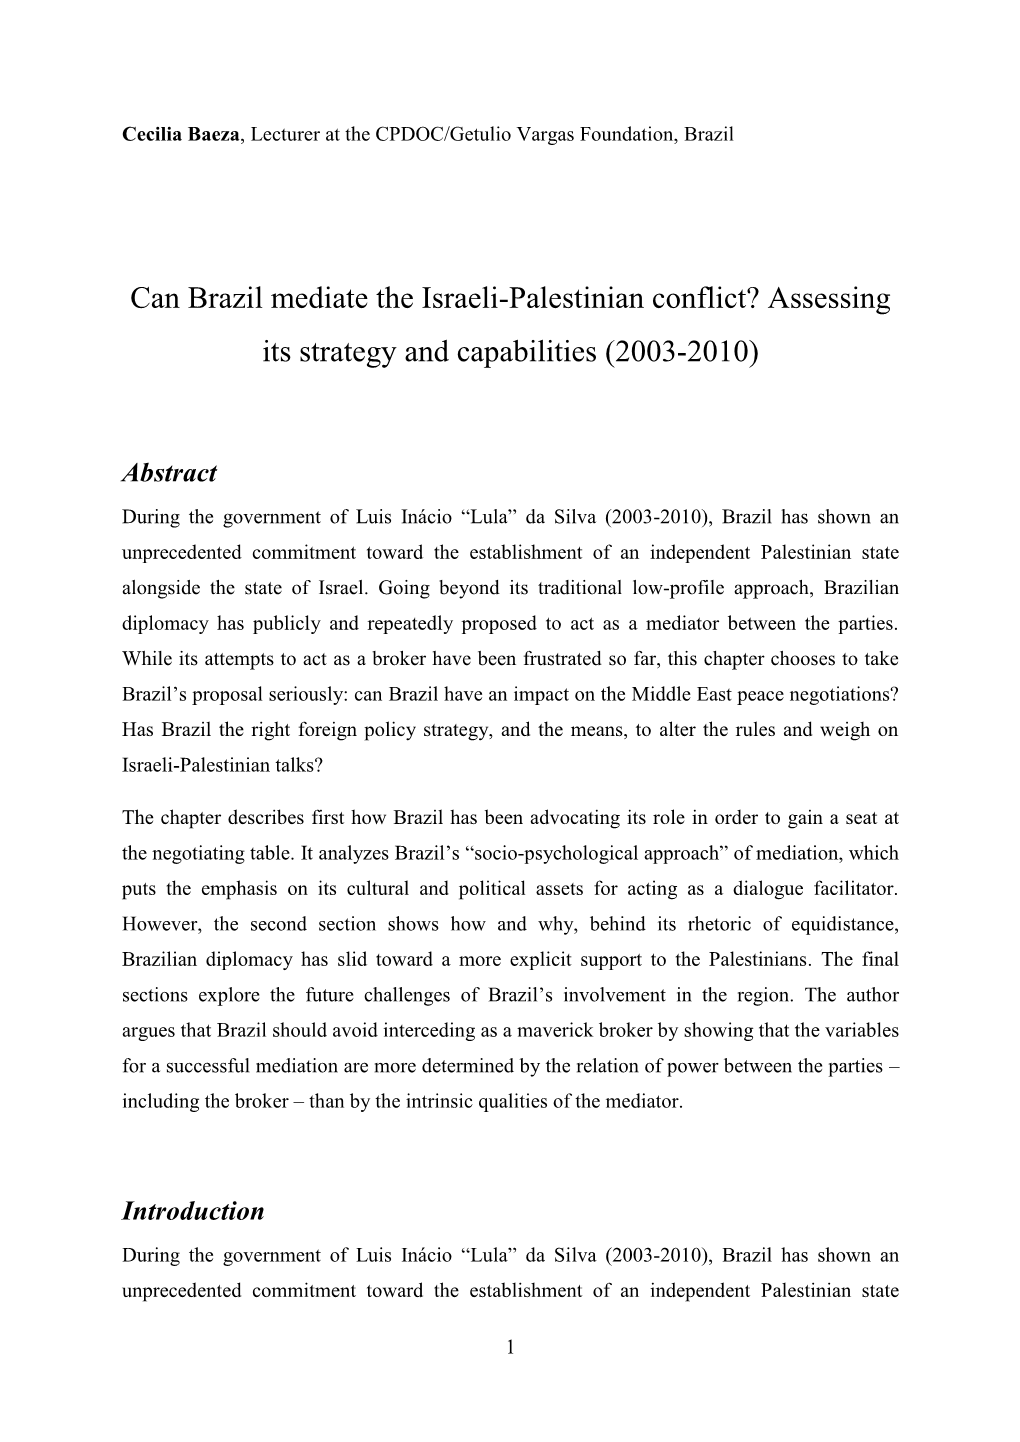 Can Brazil Mediate the Israeli-Palestinian Conflict? Assessing Its Strategy and Capabilities (2003-2010)